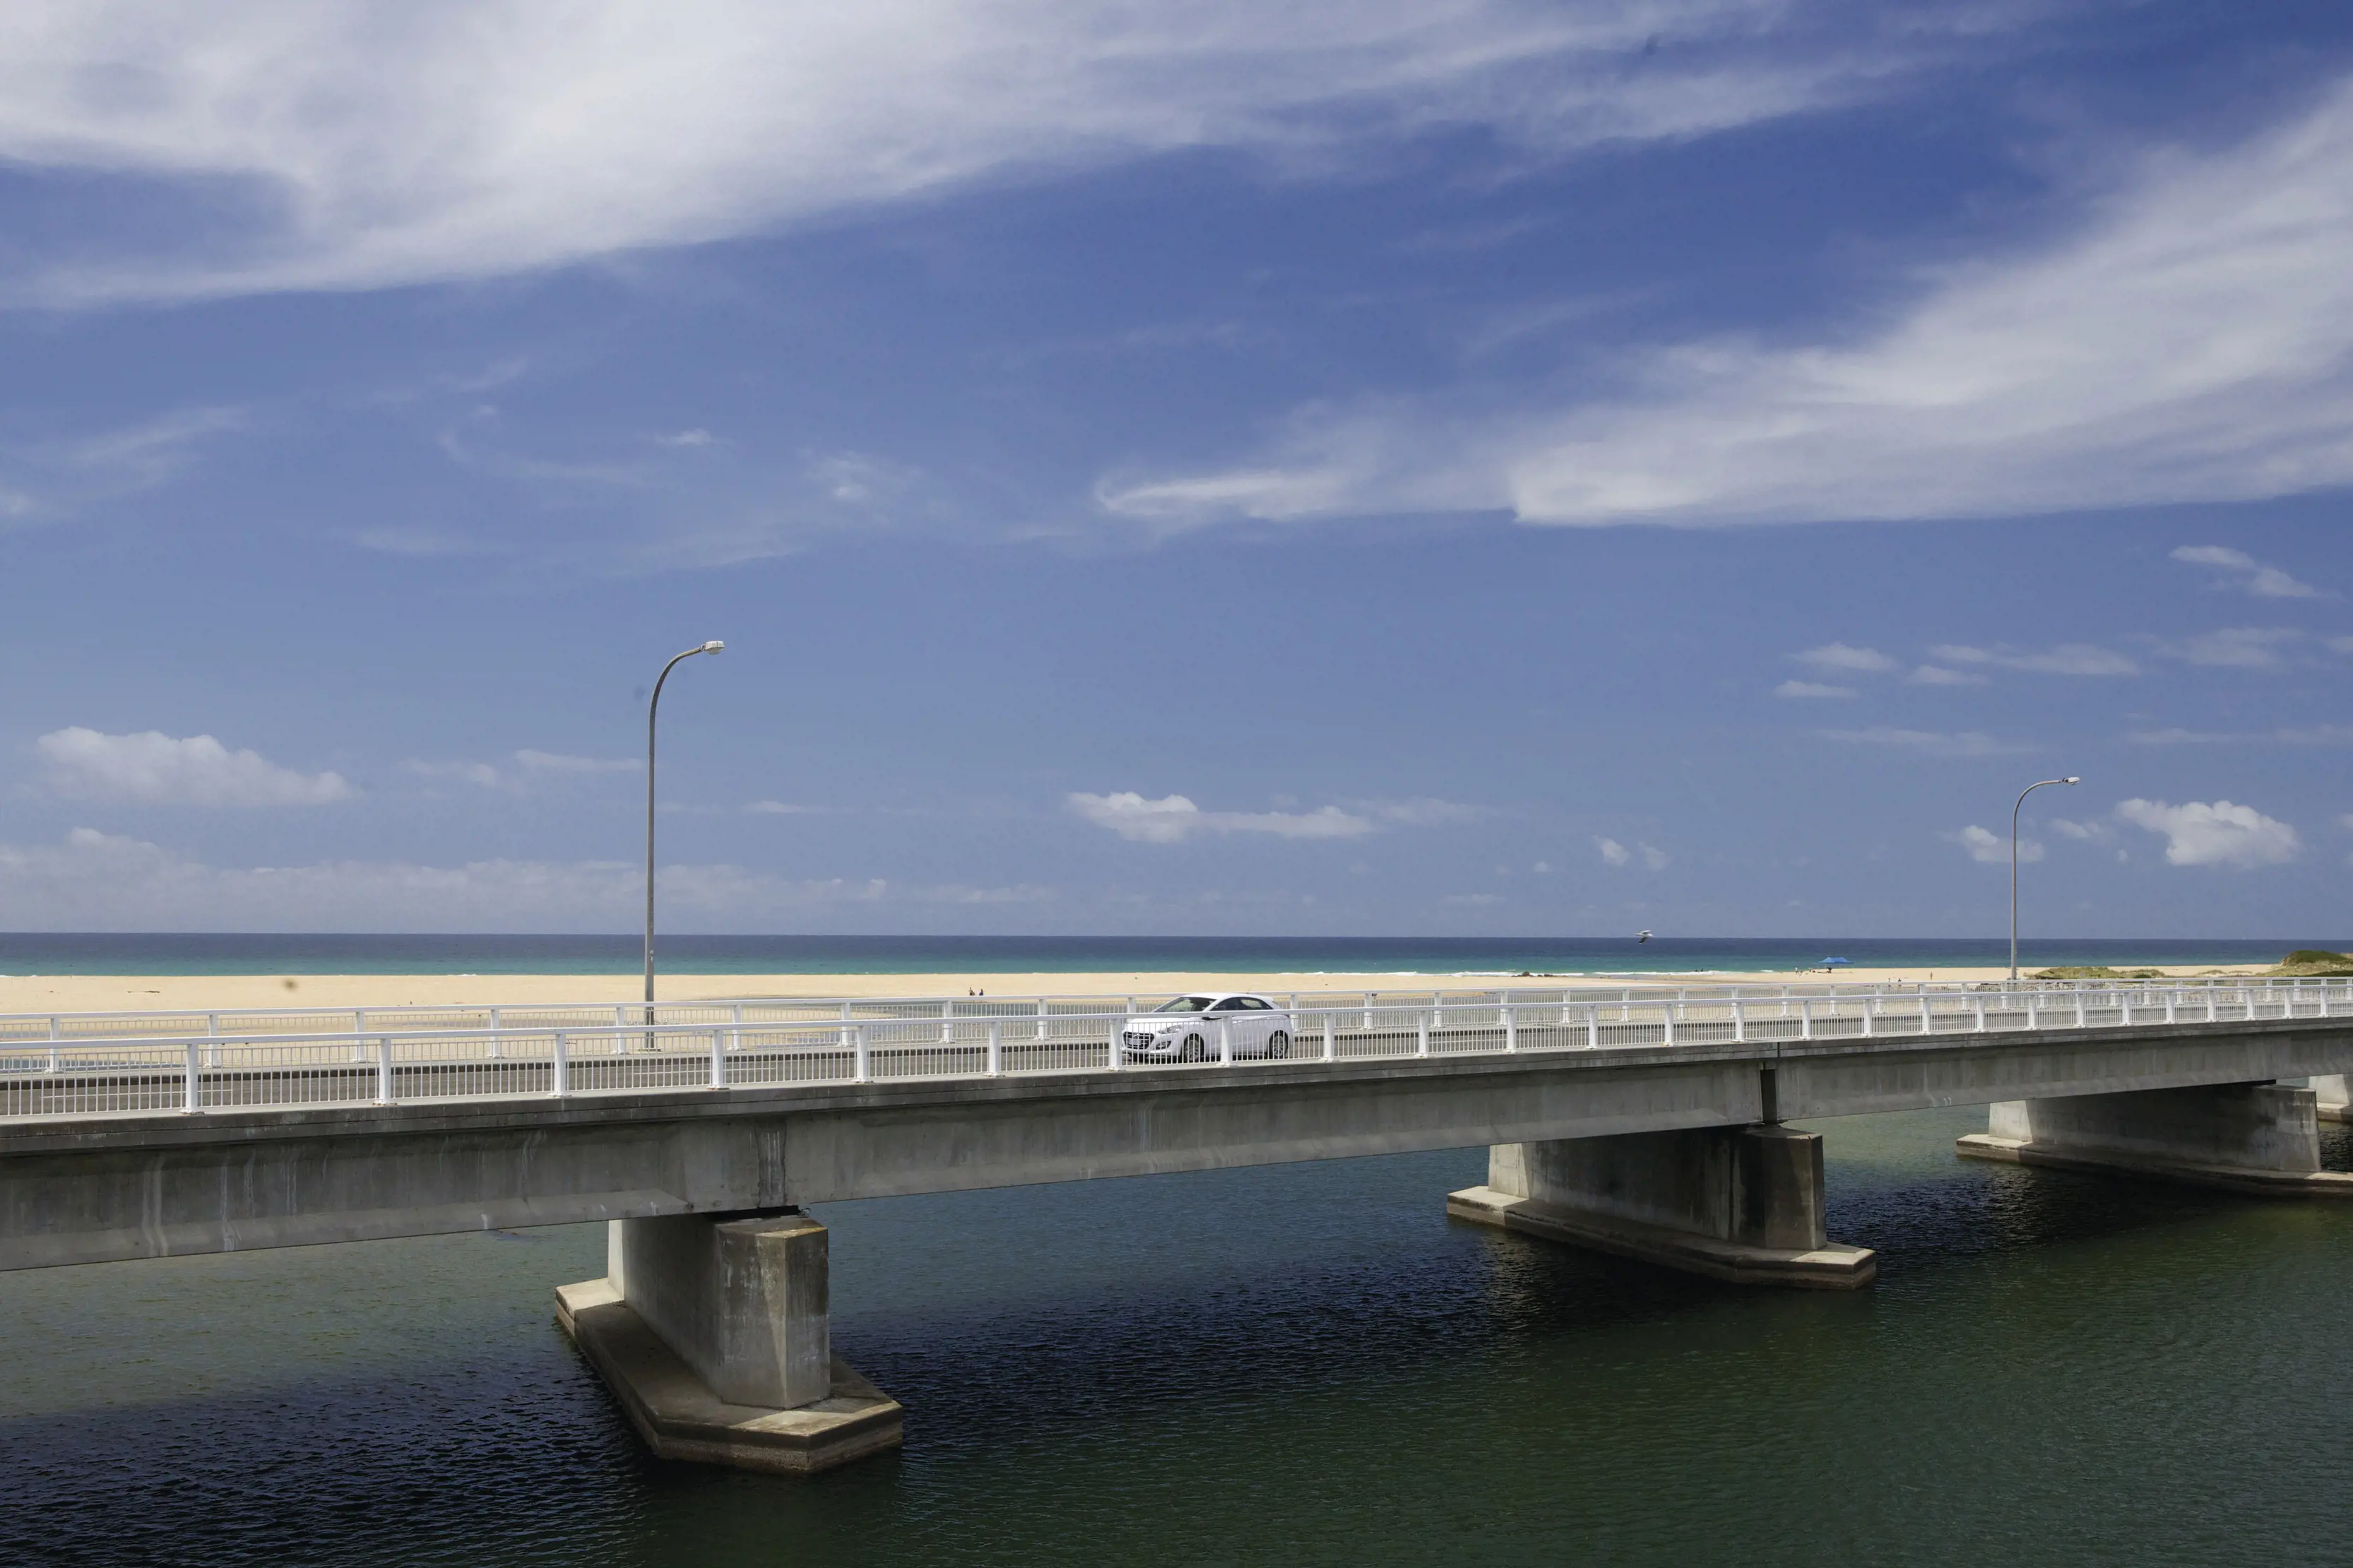 A white car drives across the bridge at Scamander, with white sandy beaches in the backdrop.